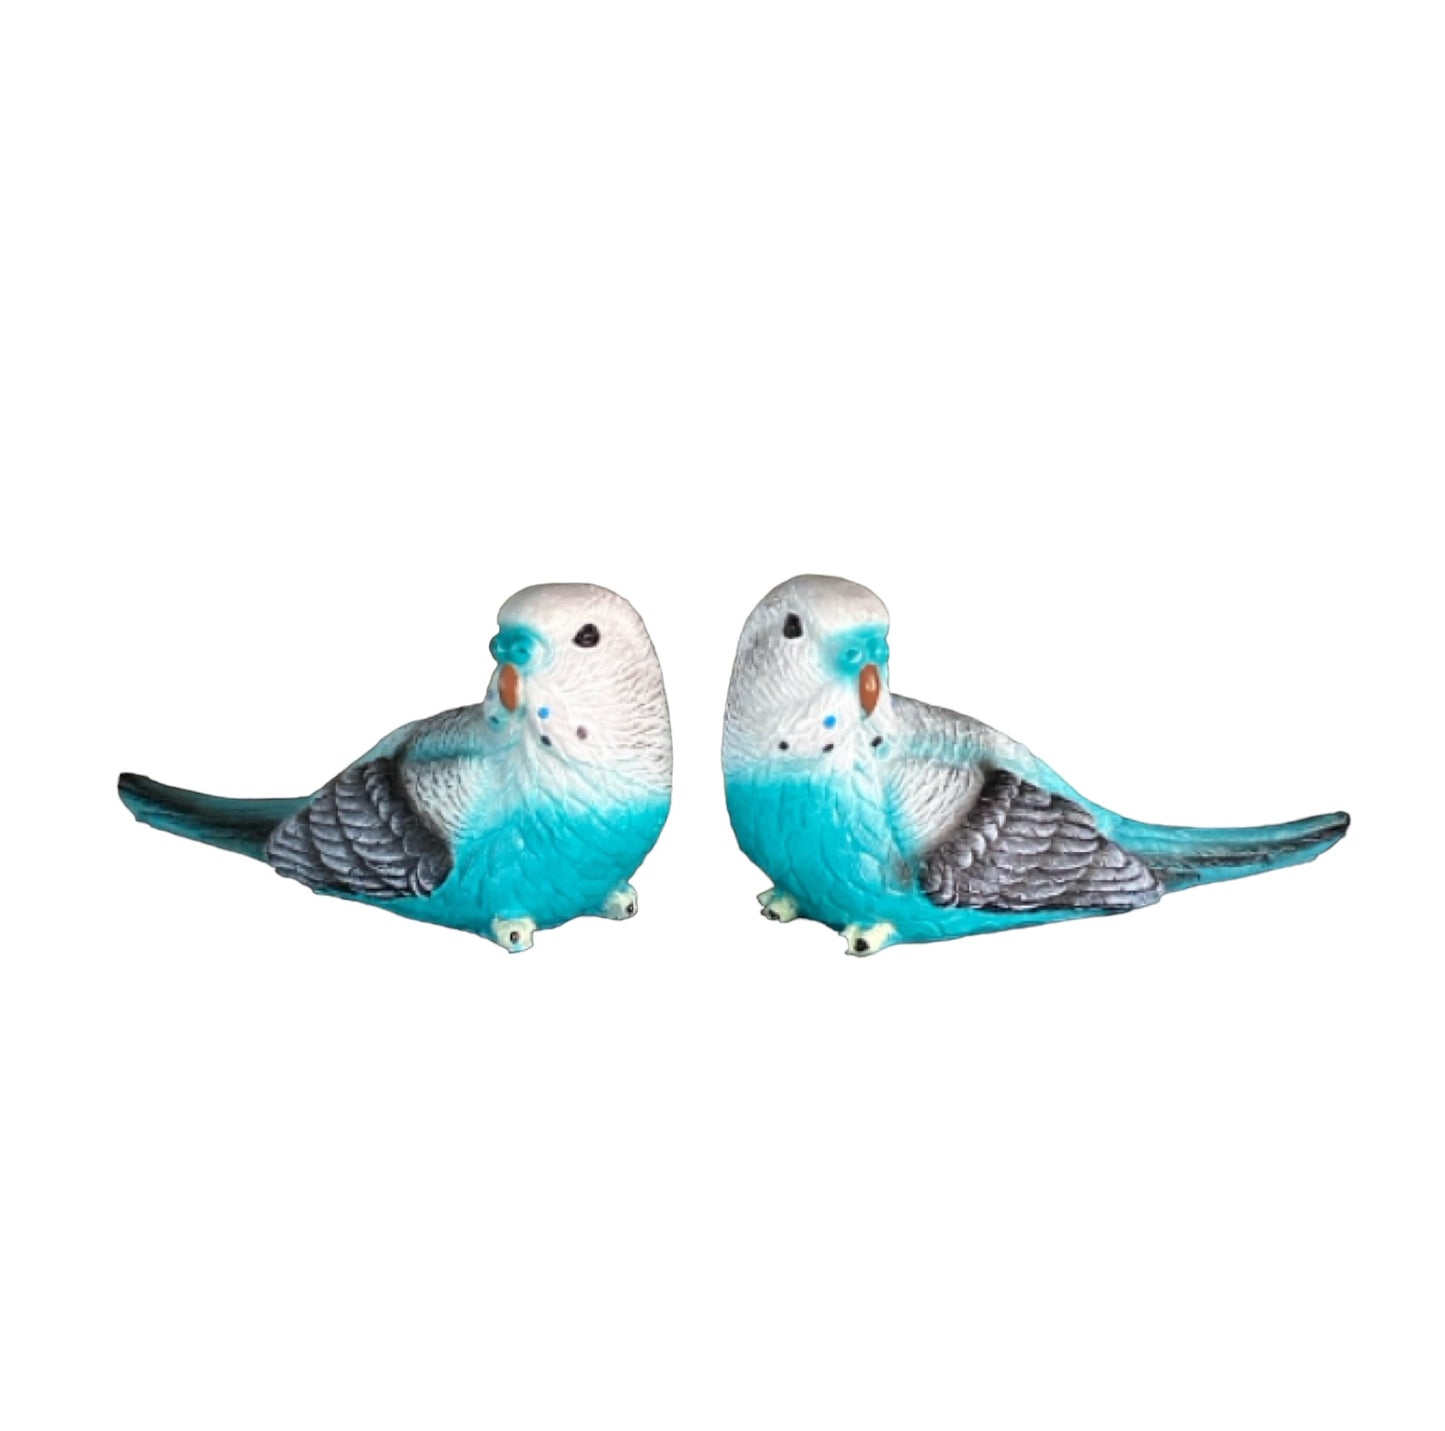 Budgie Bird Ornament Paperweight Blue - The Renmy Store Homewares & Gifts 